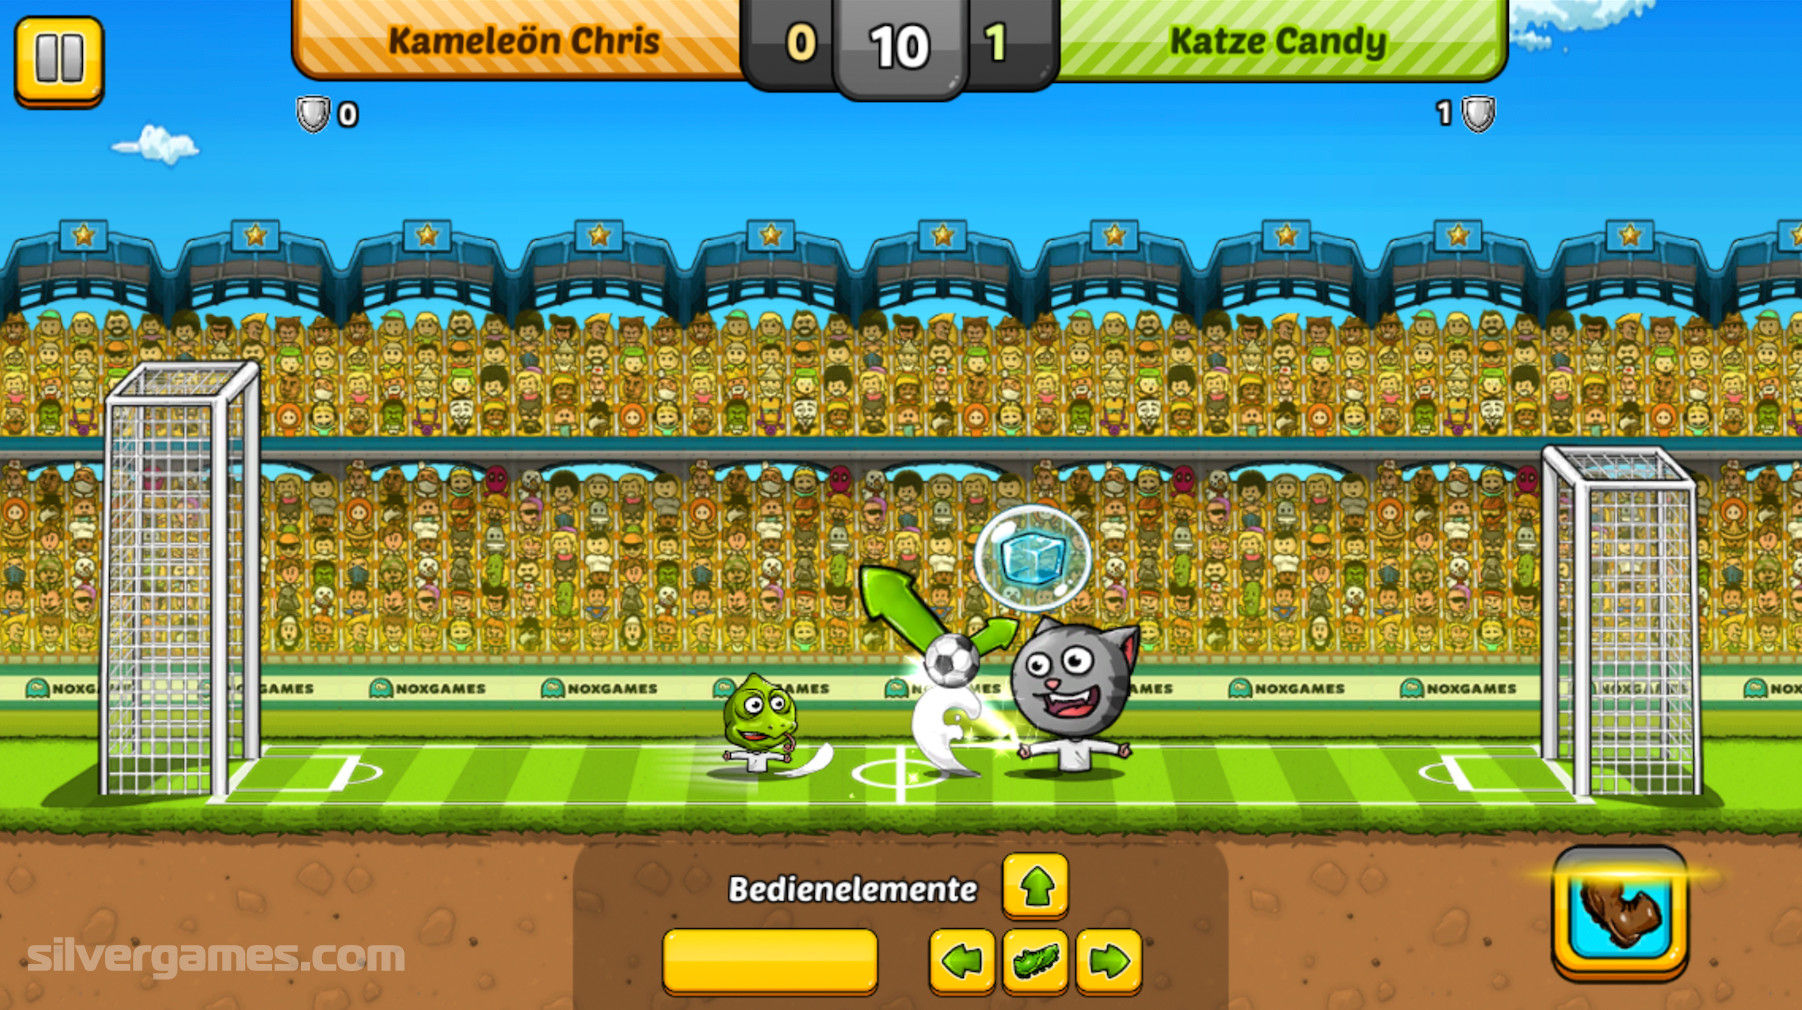 PUPPET SOCCER CHALLENGE - Play Online for Free!